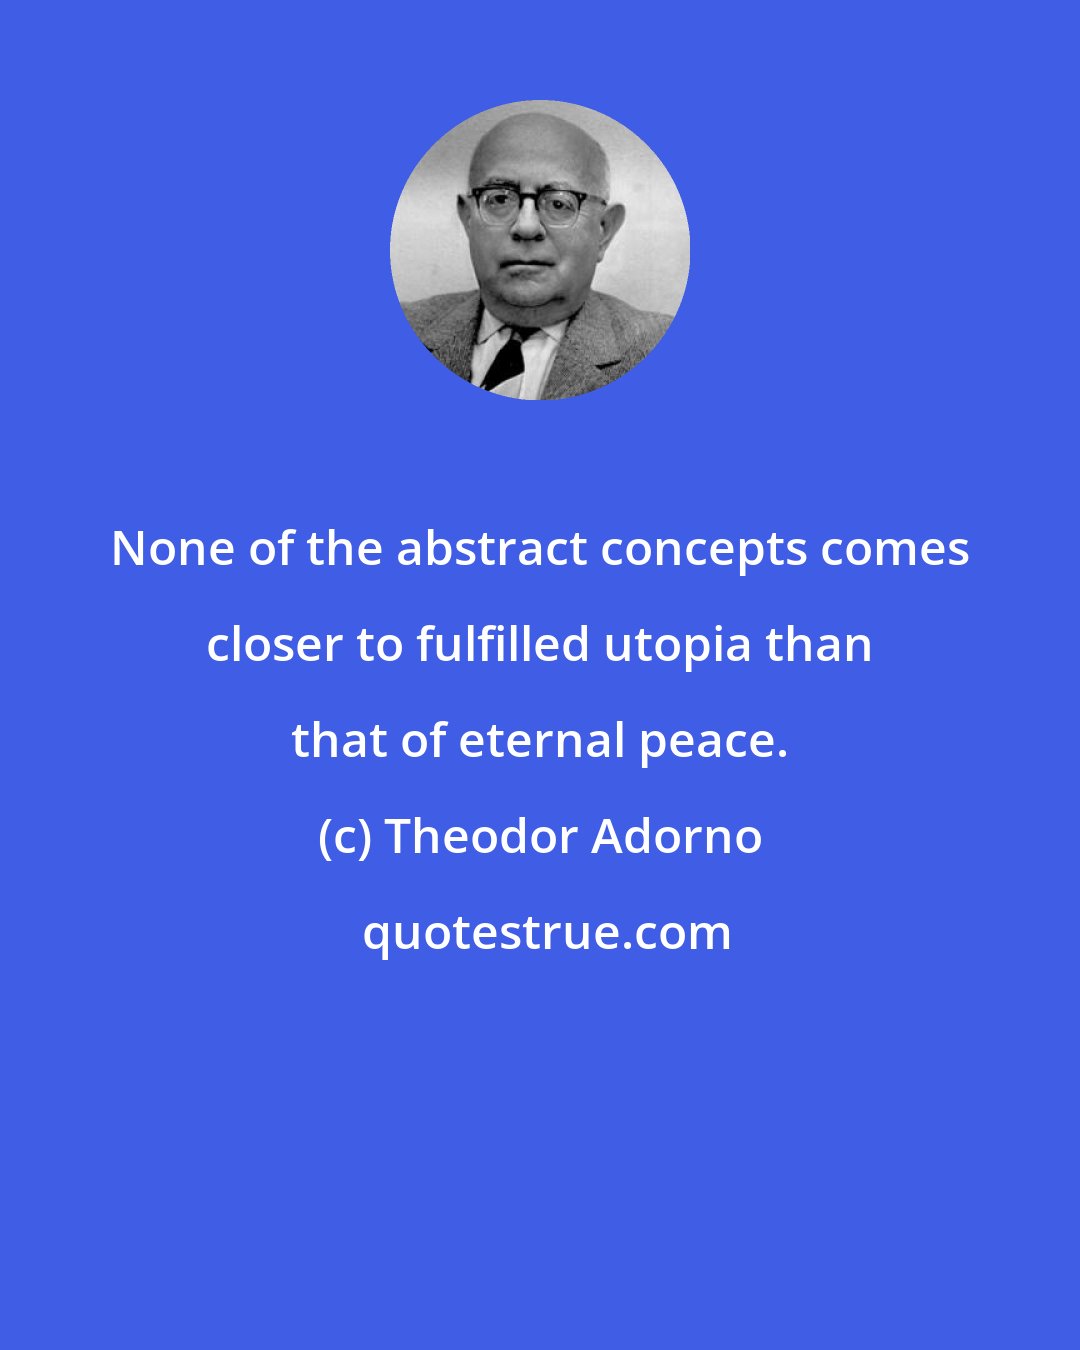 Theodor Adorno: None of the abstract concepts comes closer to fulfilled utopia than that of eternal peace.